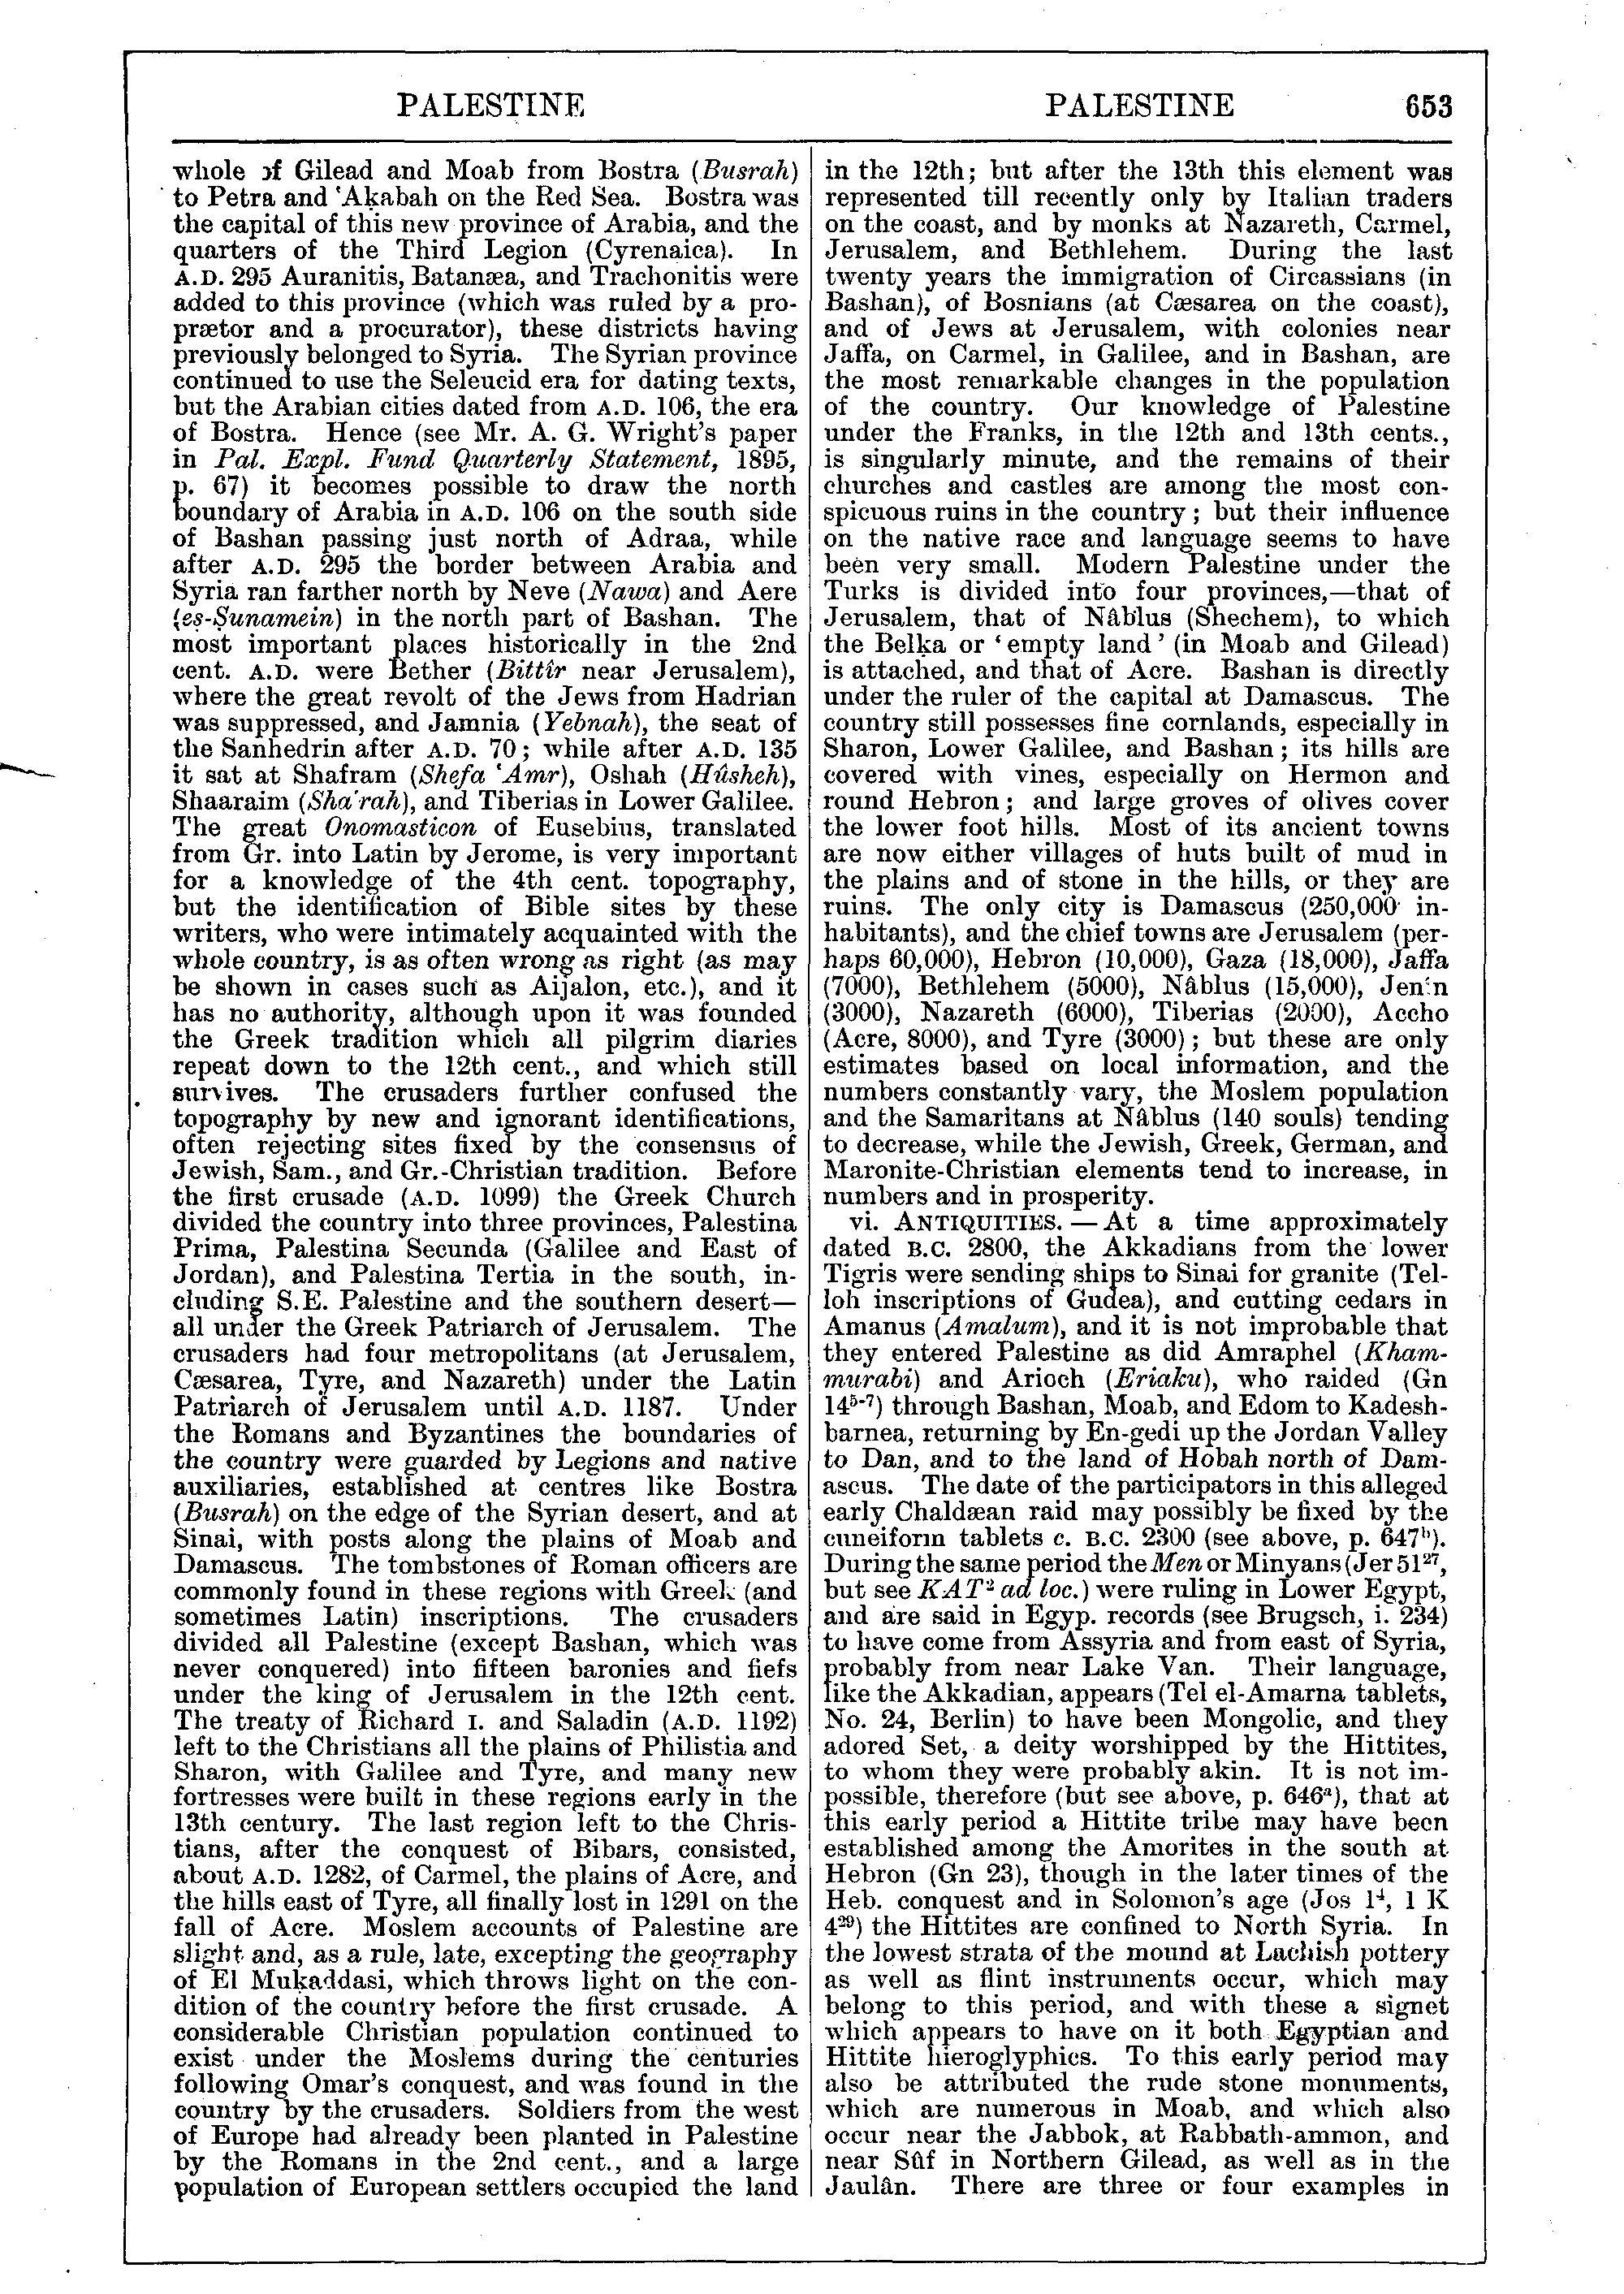 Image of page 653